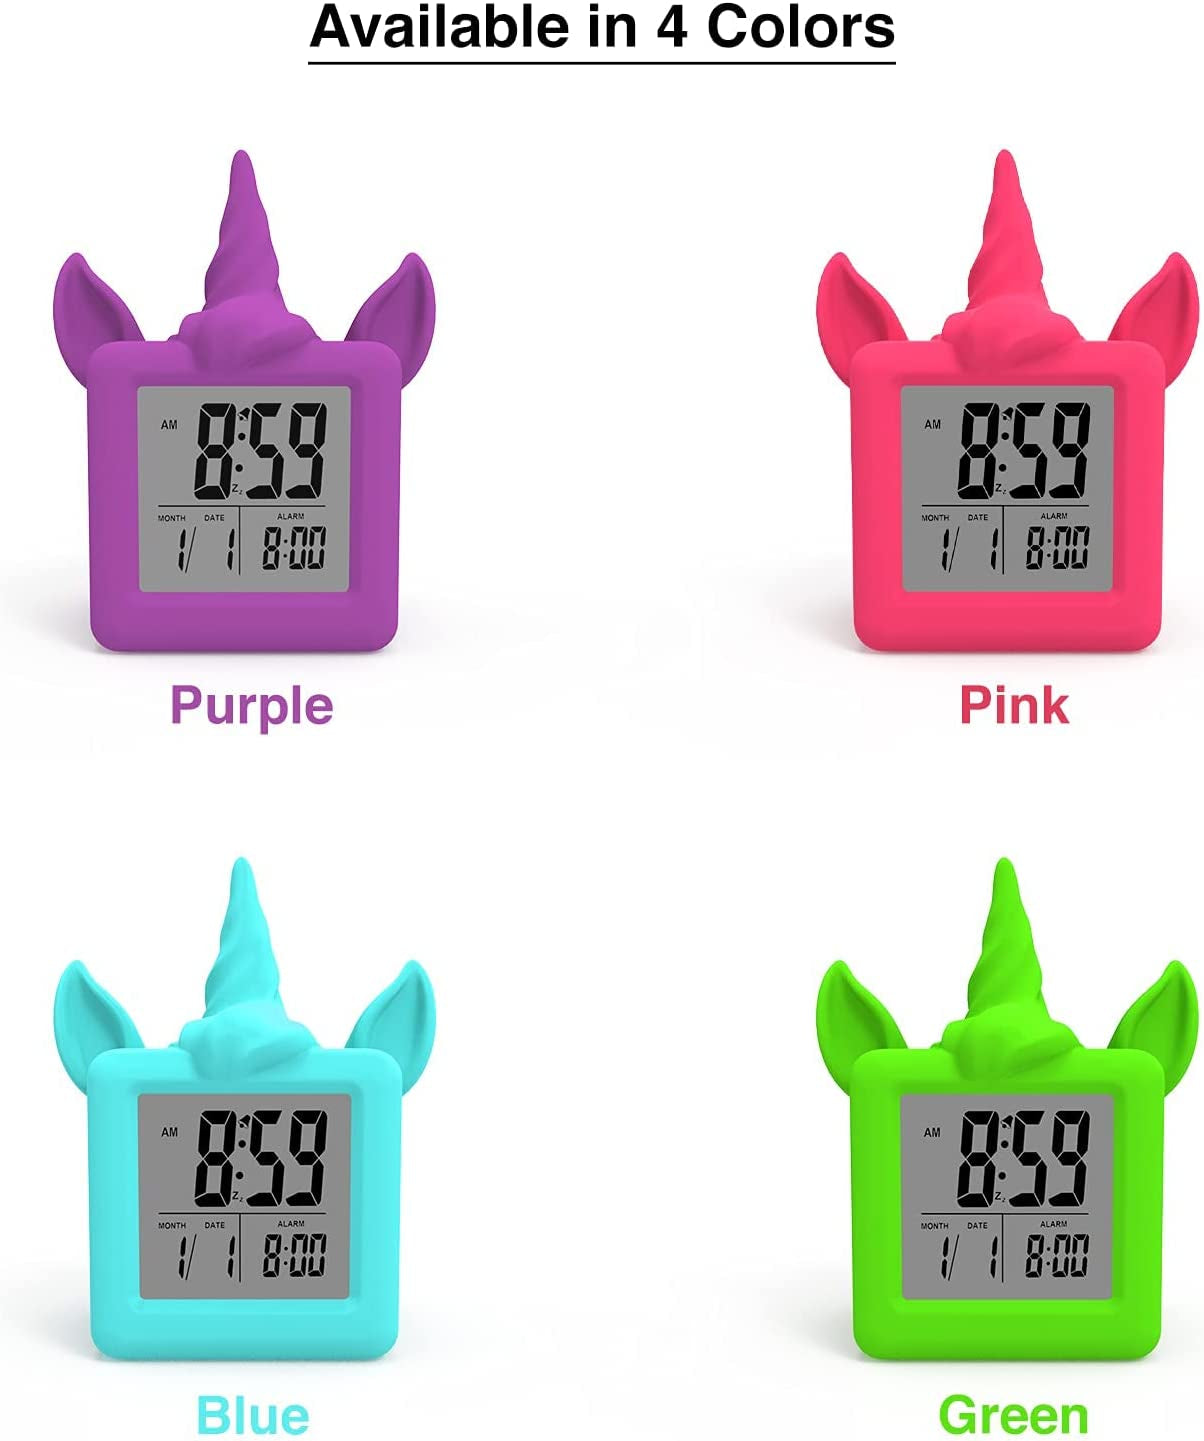 Something Unicorn - Unicorn Digital Alarm Clock with Snooze Button and Pink LCD Back-Lighting. Easy to Set Battery Powered Digital Clock in Silicone Sleeve with Time, Date and Alarm Display. (Pink)